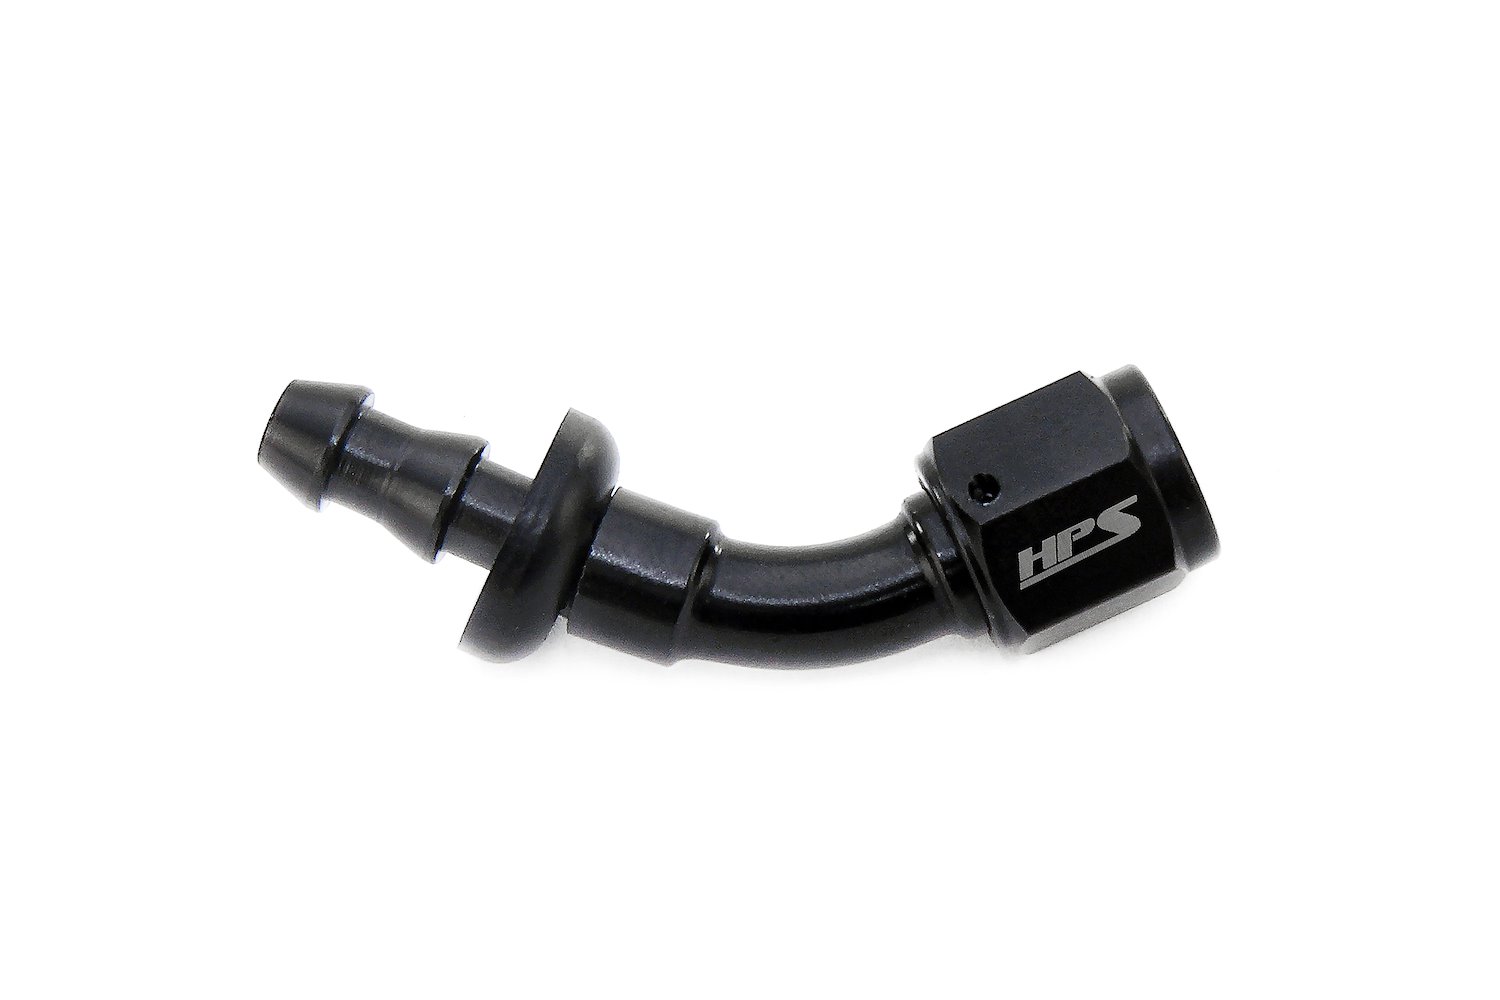 150-3004 150 Series 30-Deg Hose End, Tool-Free Assembly Hose Ends, For Push-On Style Hoses, Easy To Use